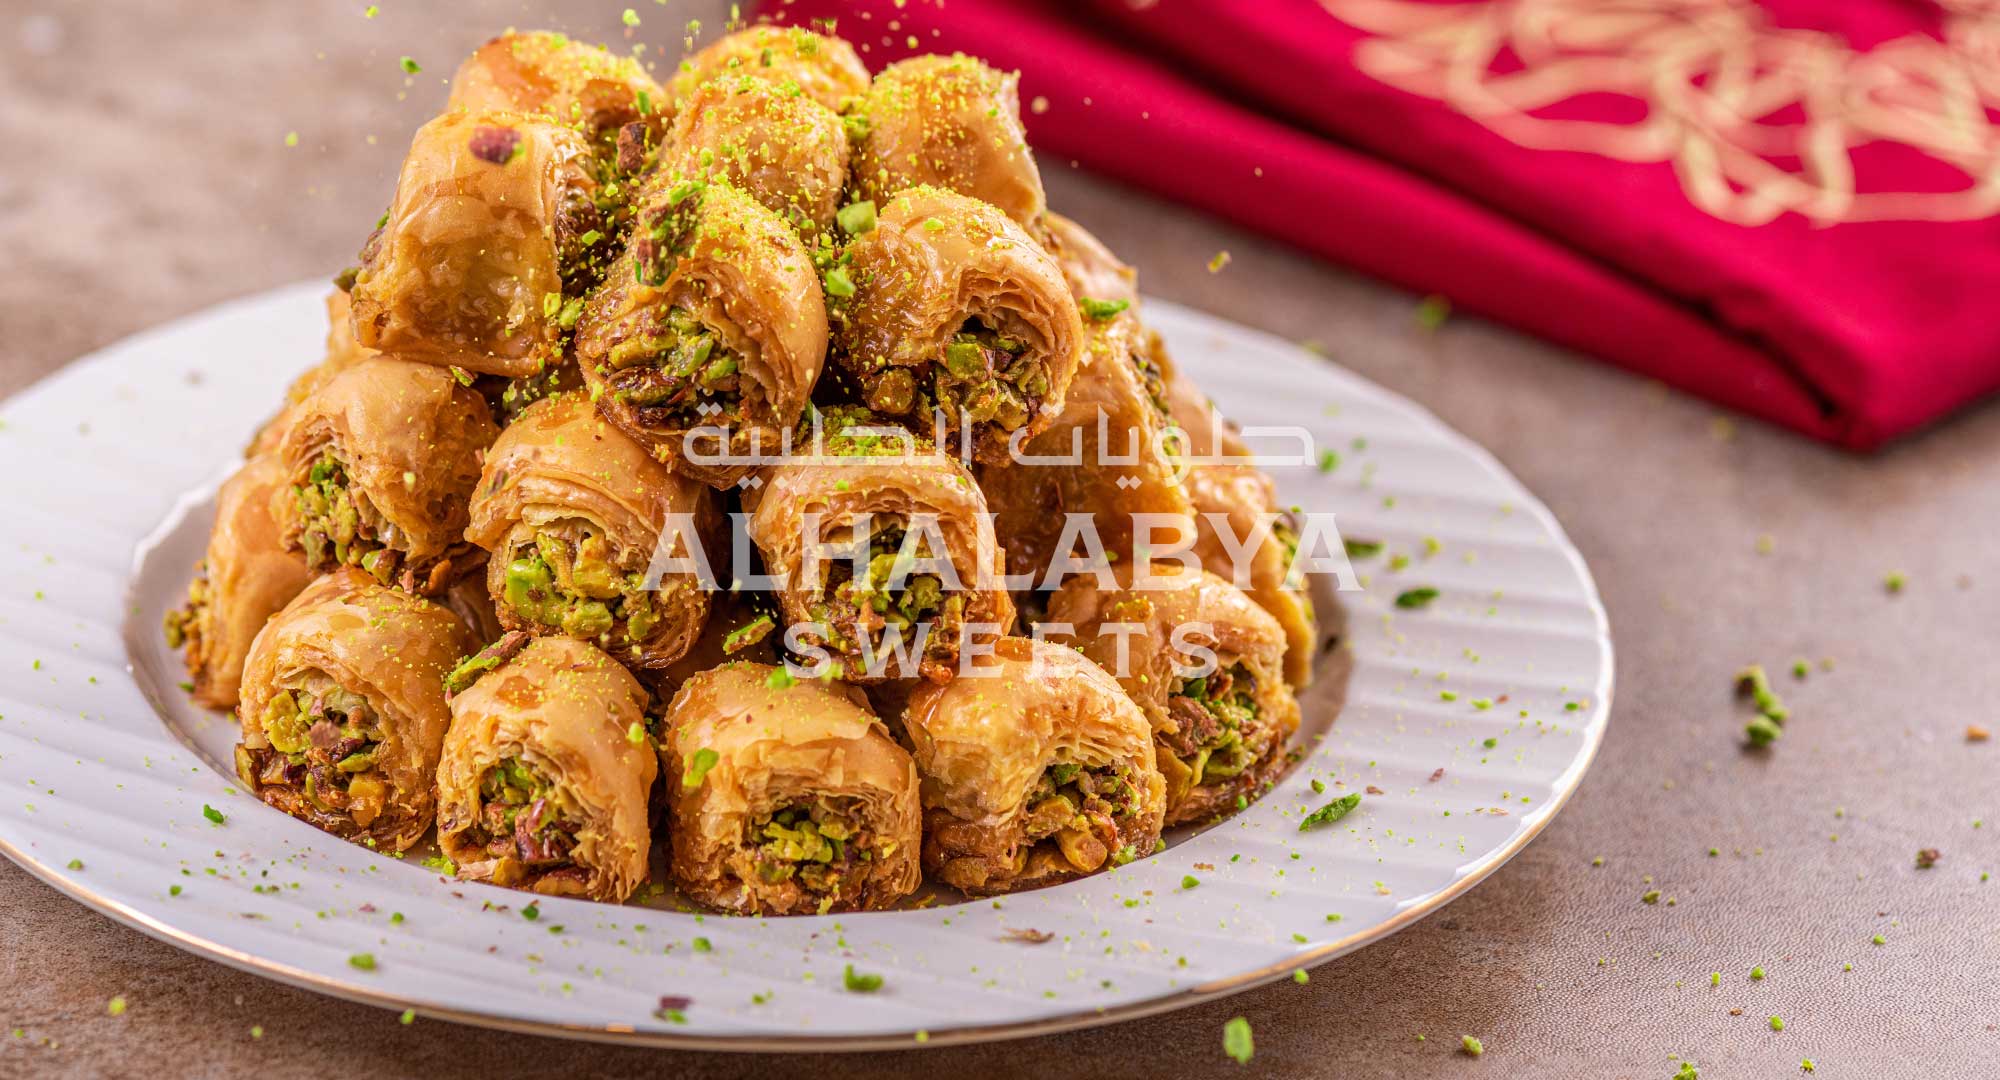 Crafting Quality: Behind the Scenes at Al Halabya Sweets